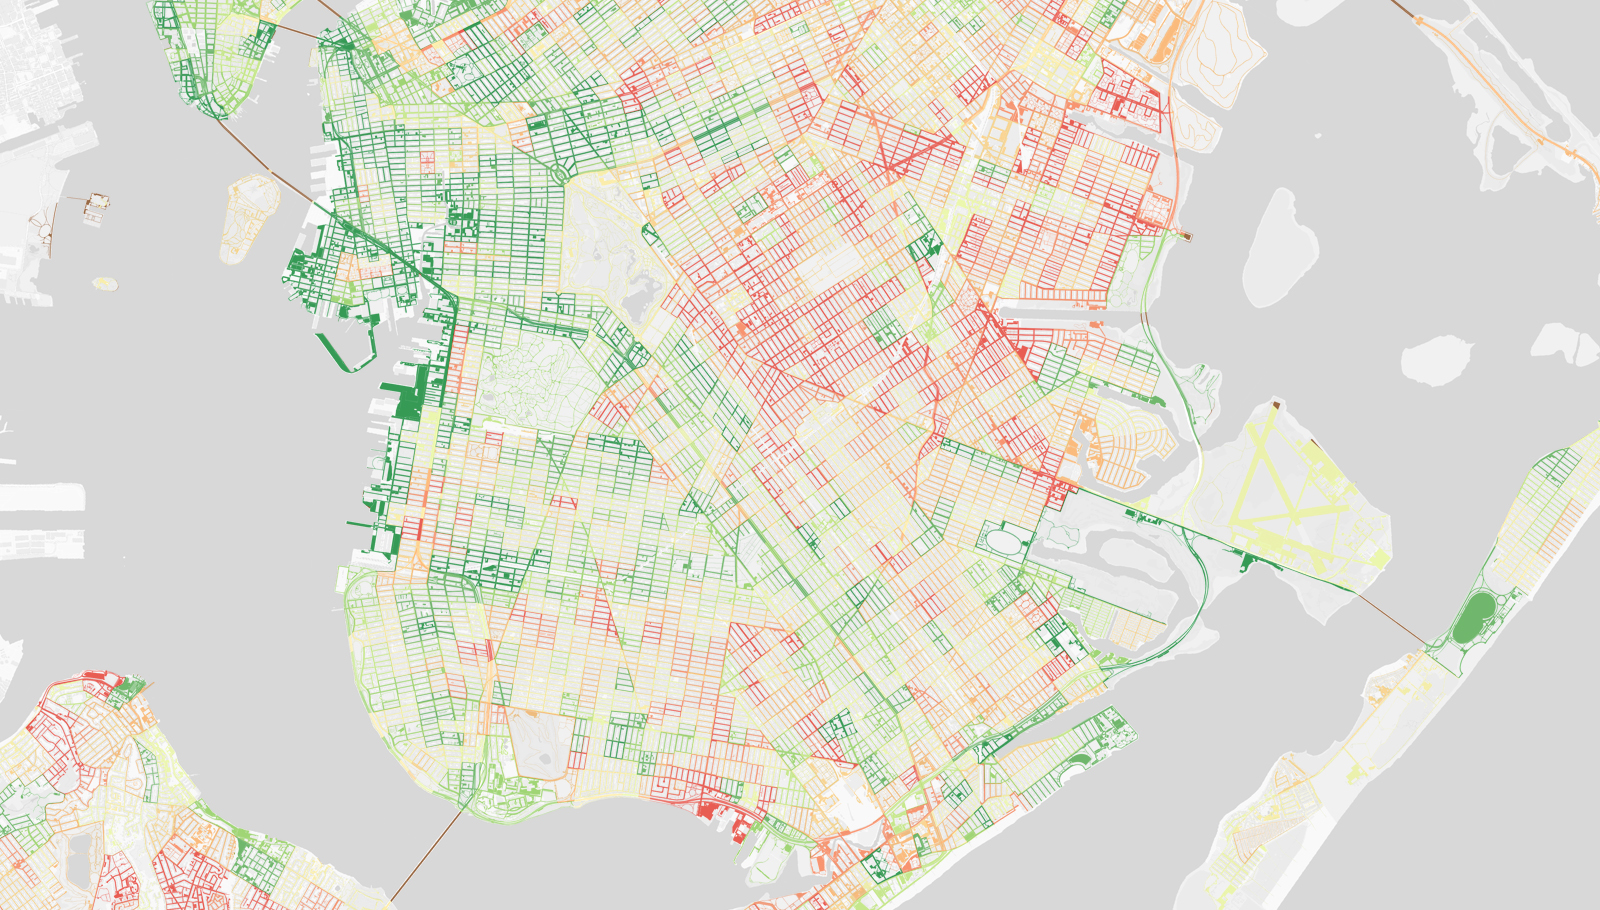 Systematica_Women Walkability Index in NYC